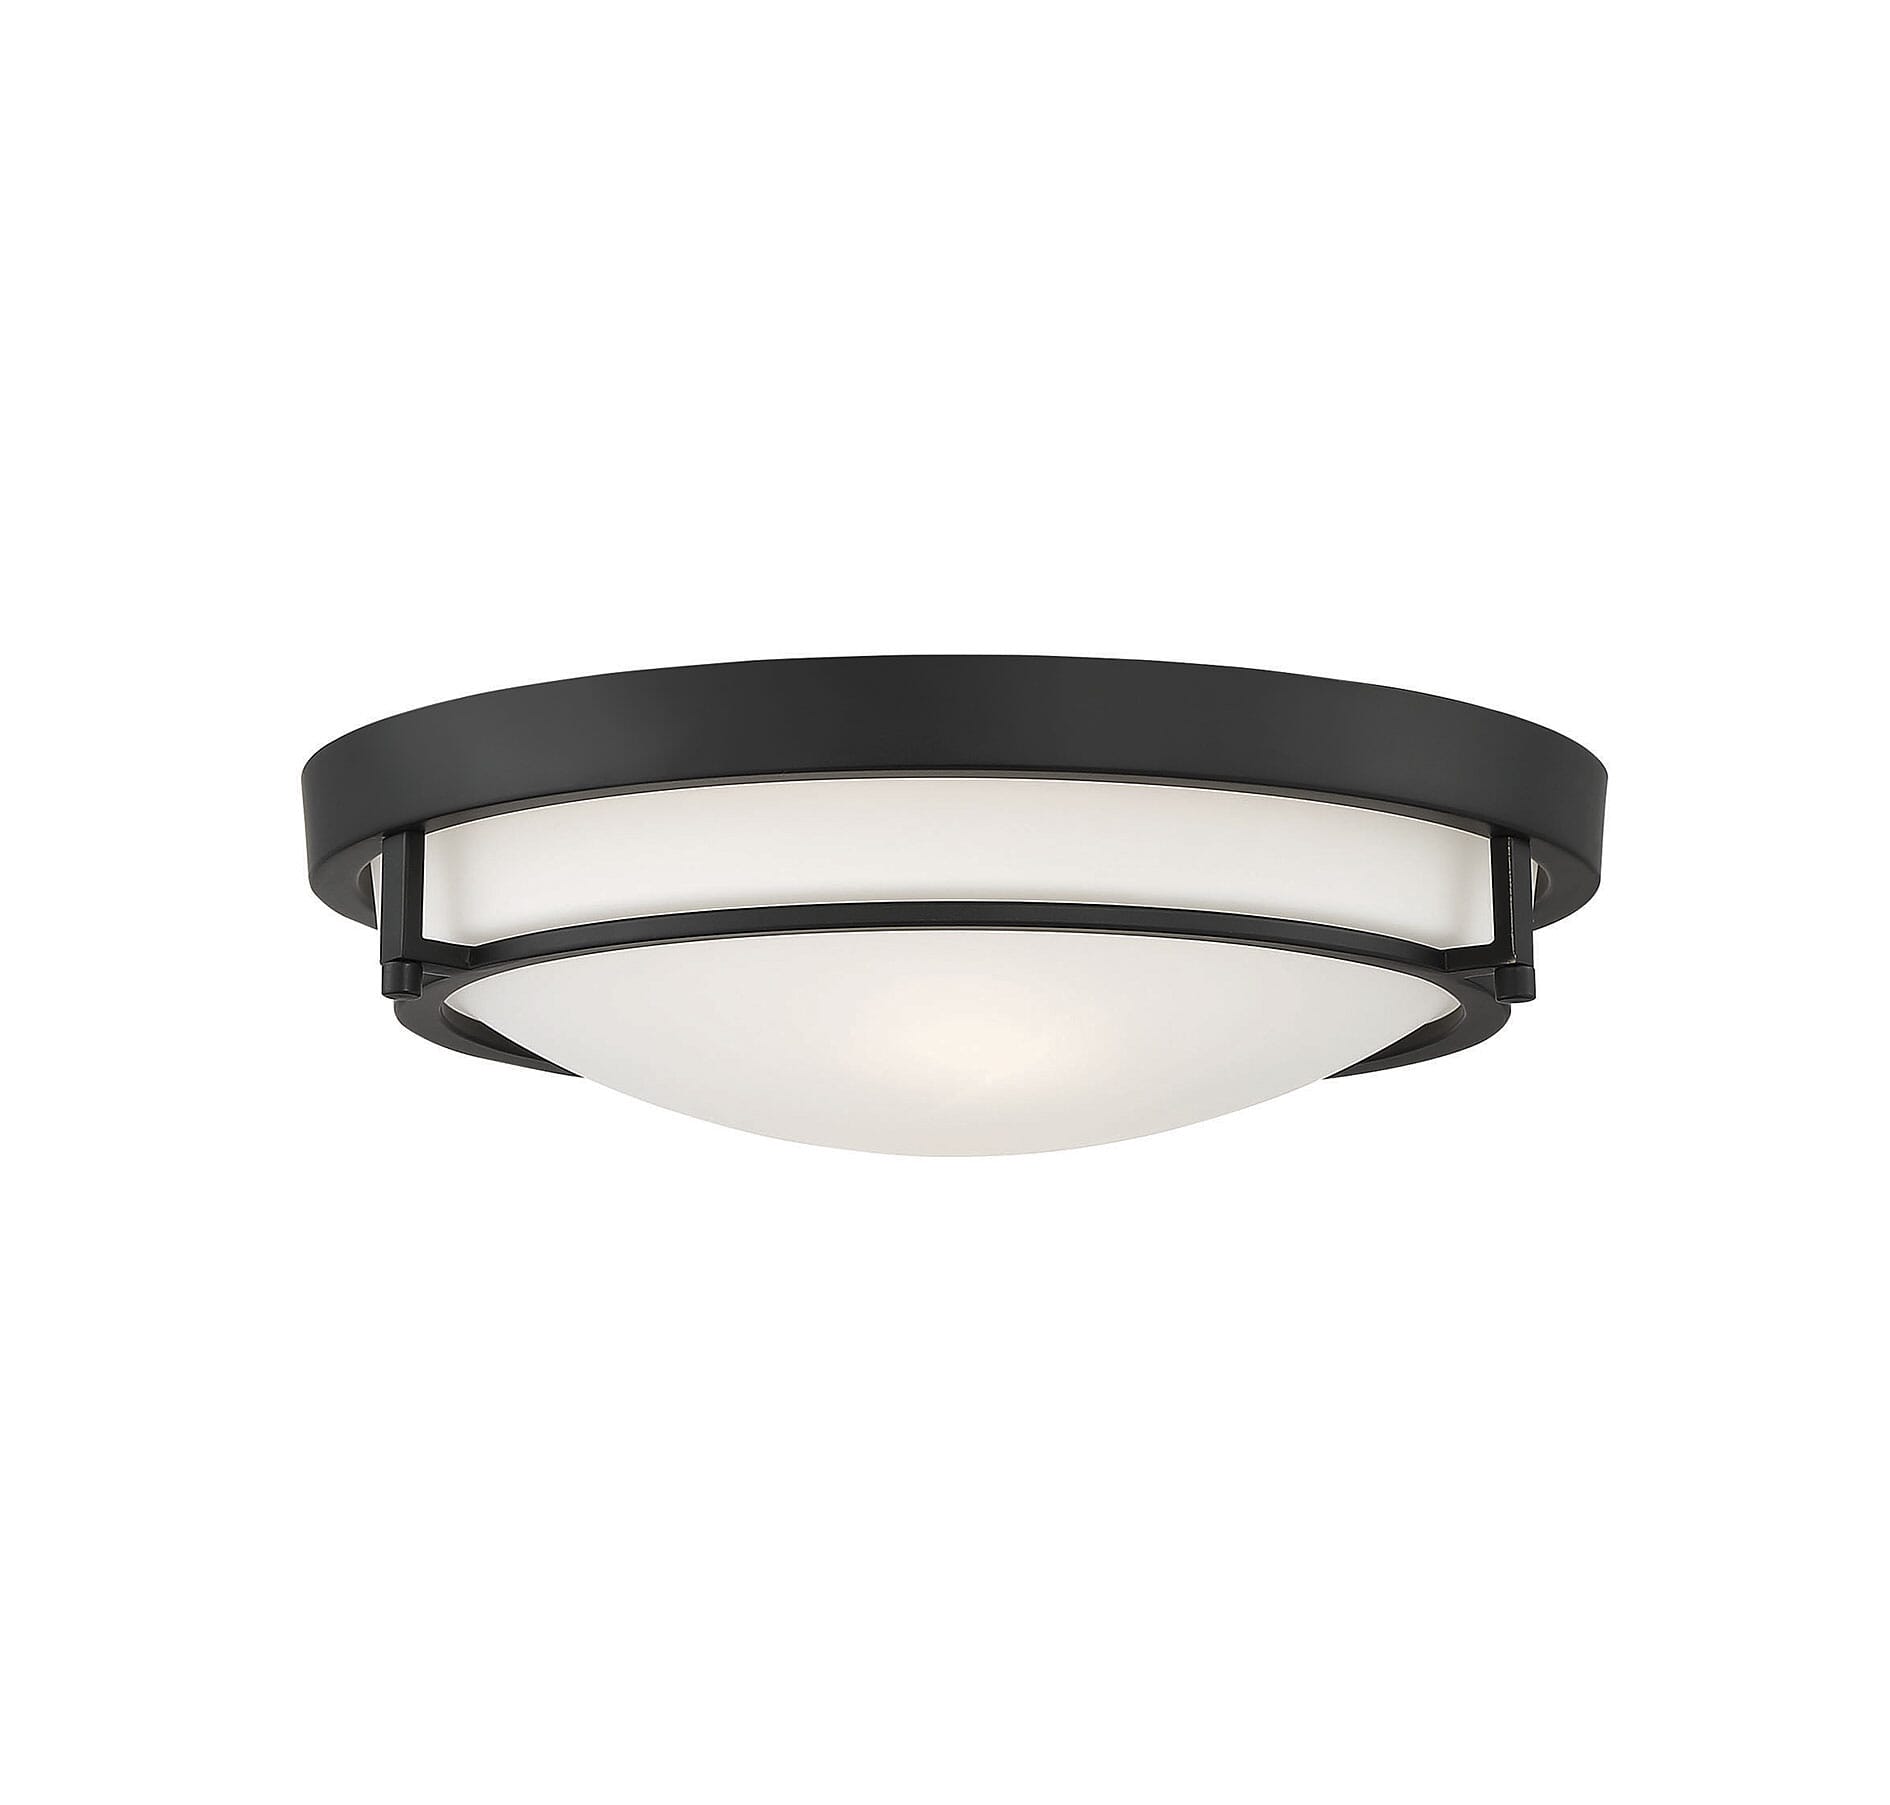 Trade Winds Lighting TW80024-MBK